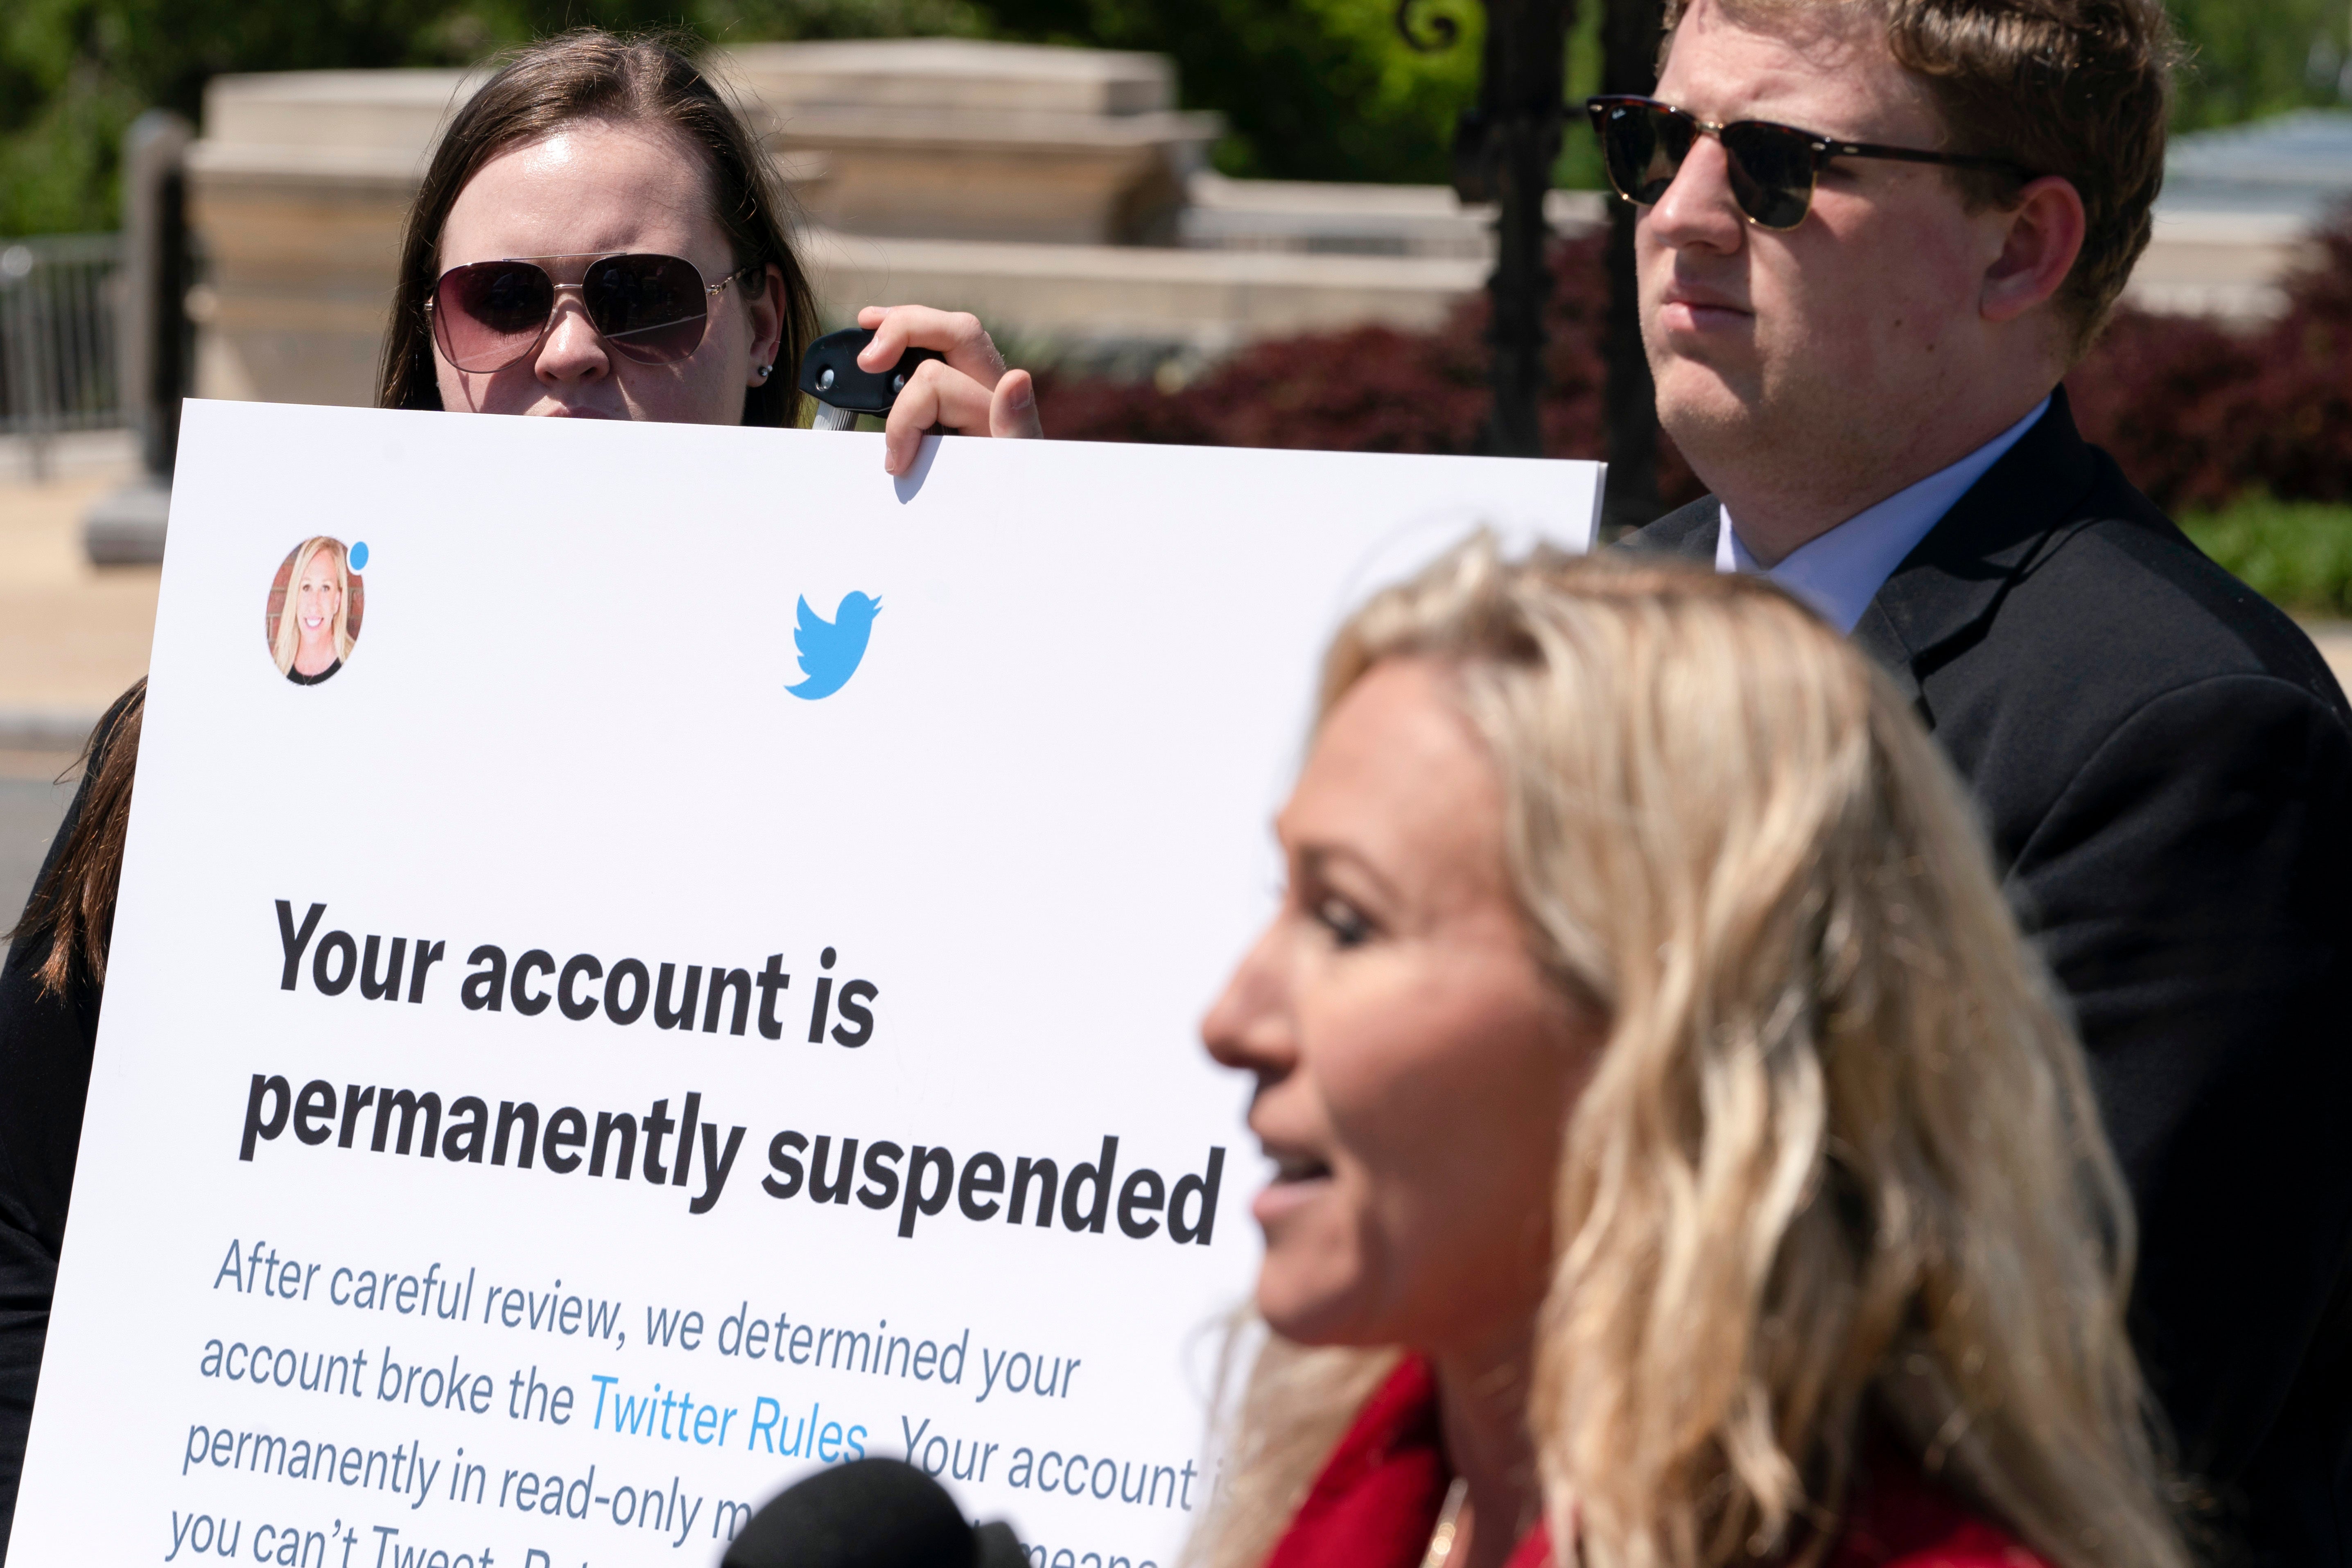 Georgia congresswoman Marjorie Taylor Greene’s Twitter account was suspended for violating the company’s Covid-19 misinformation policies. She has continued to post from her congressional account and on platforms like Telegram and Truth Social.